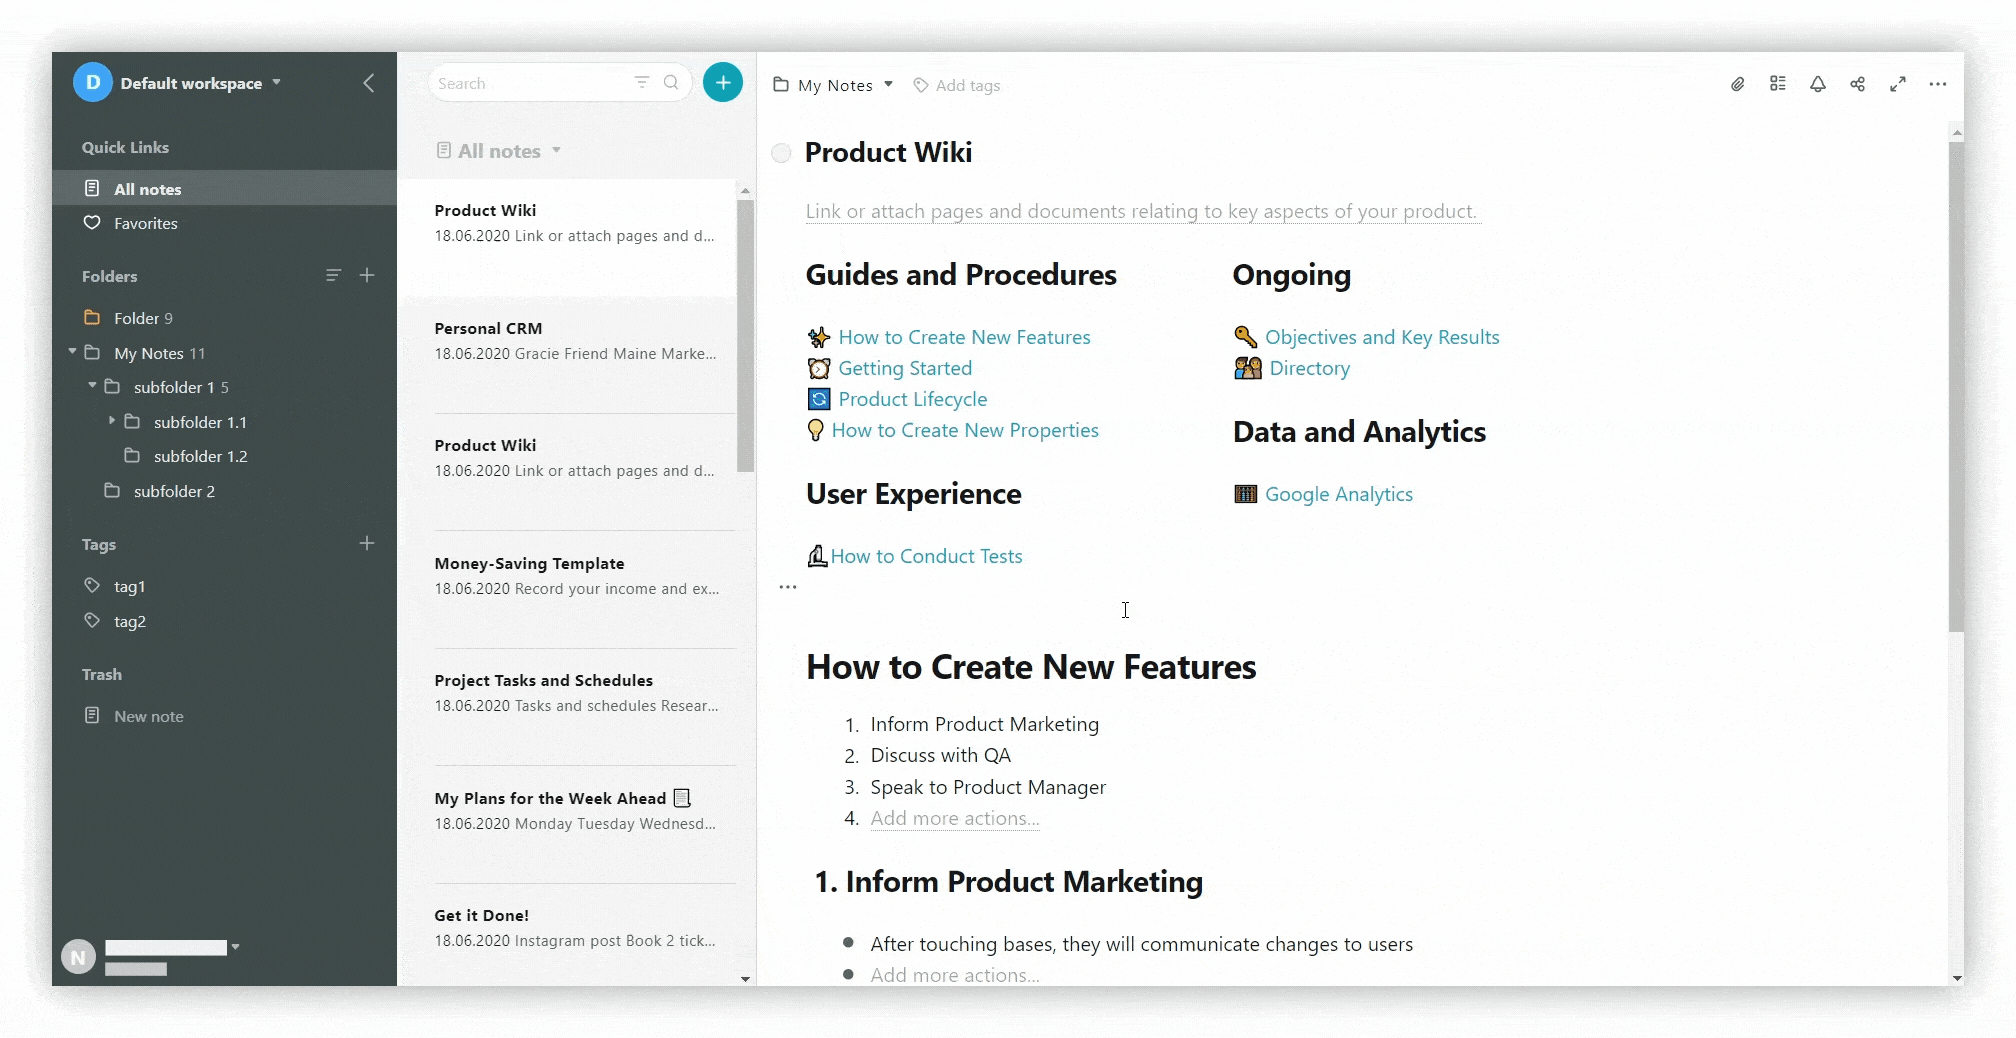 Collapse folders, move pages & folders, and change tags